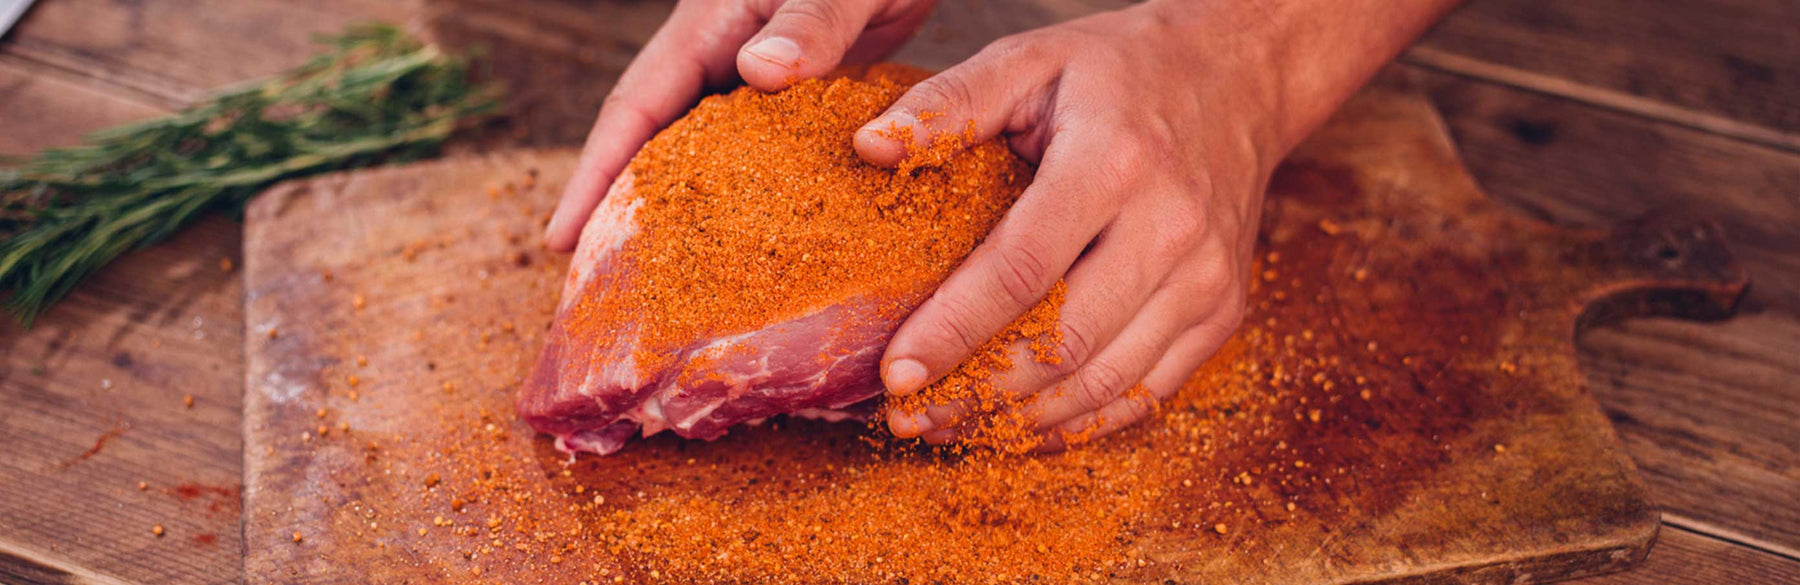 Make Grilling Easy With These 4 Tantalizing Dry Rubs - Great Backyard Place